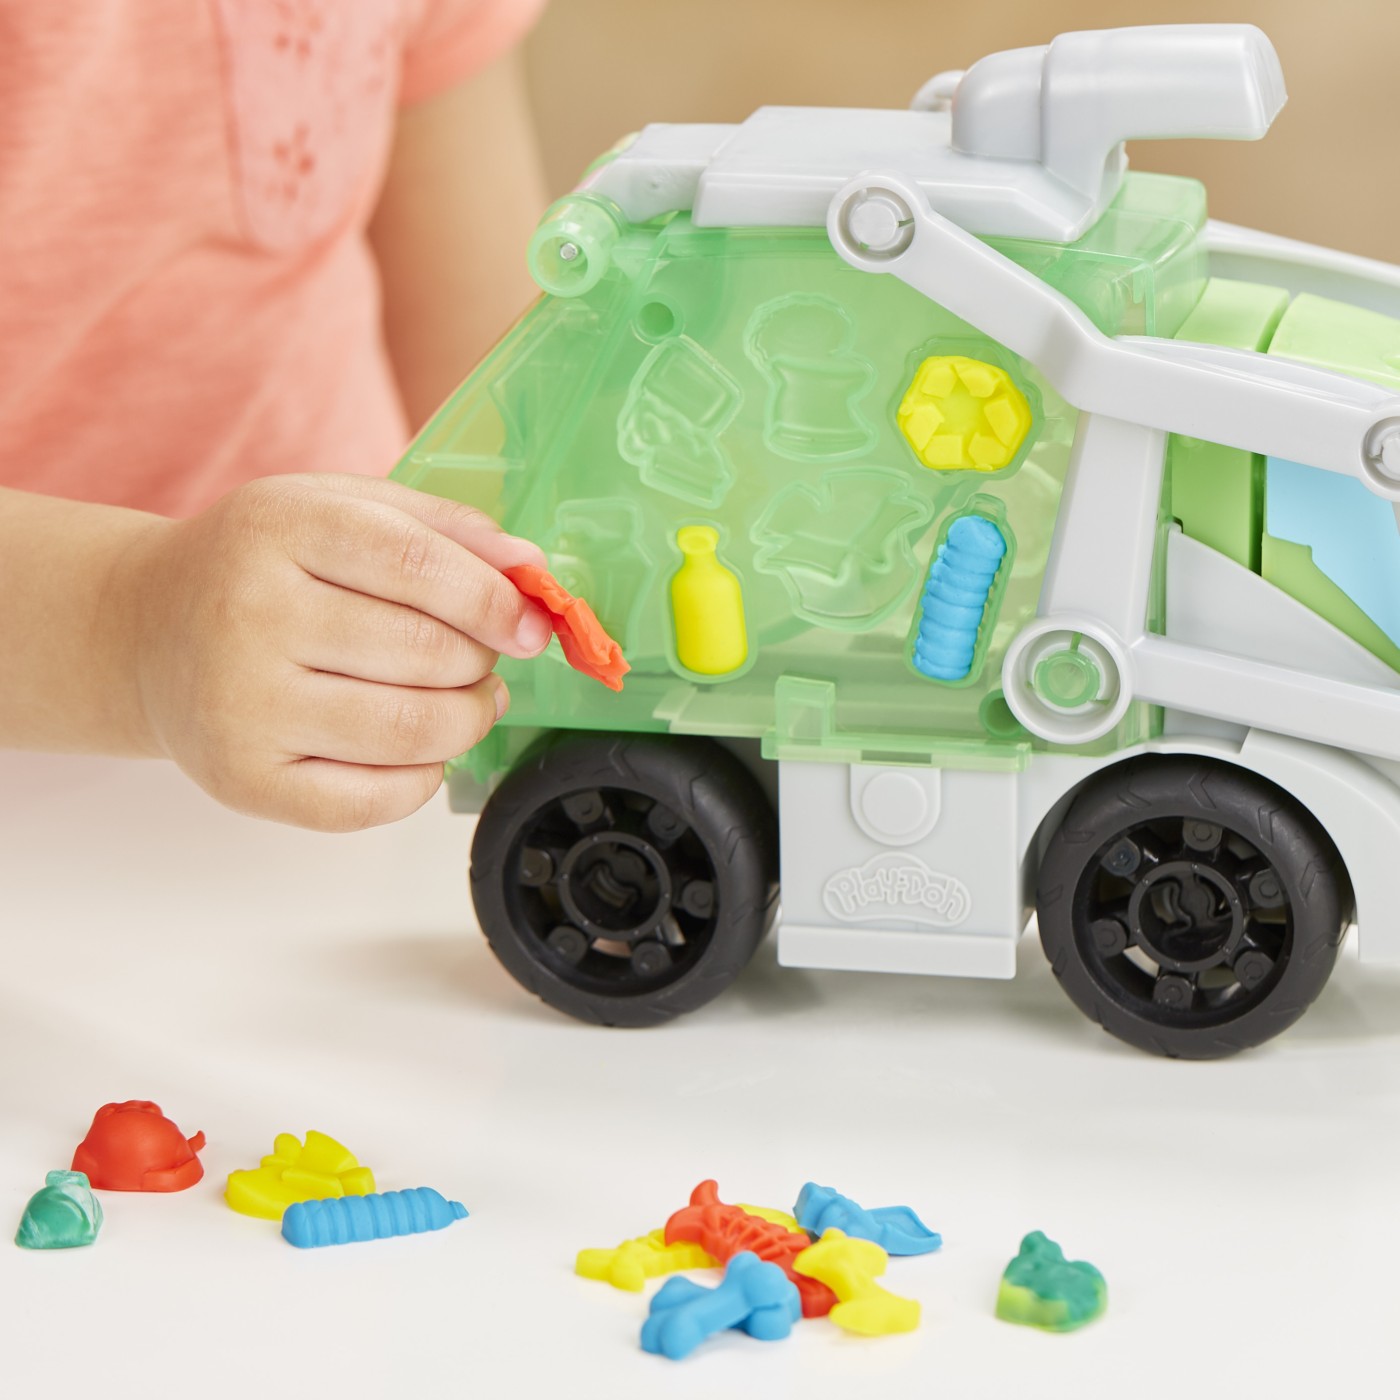 Set Jucarie - Camion Gunoi 2 In 1 | Play-Doh - 4